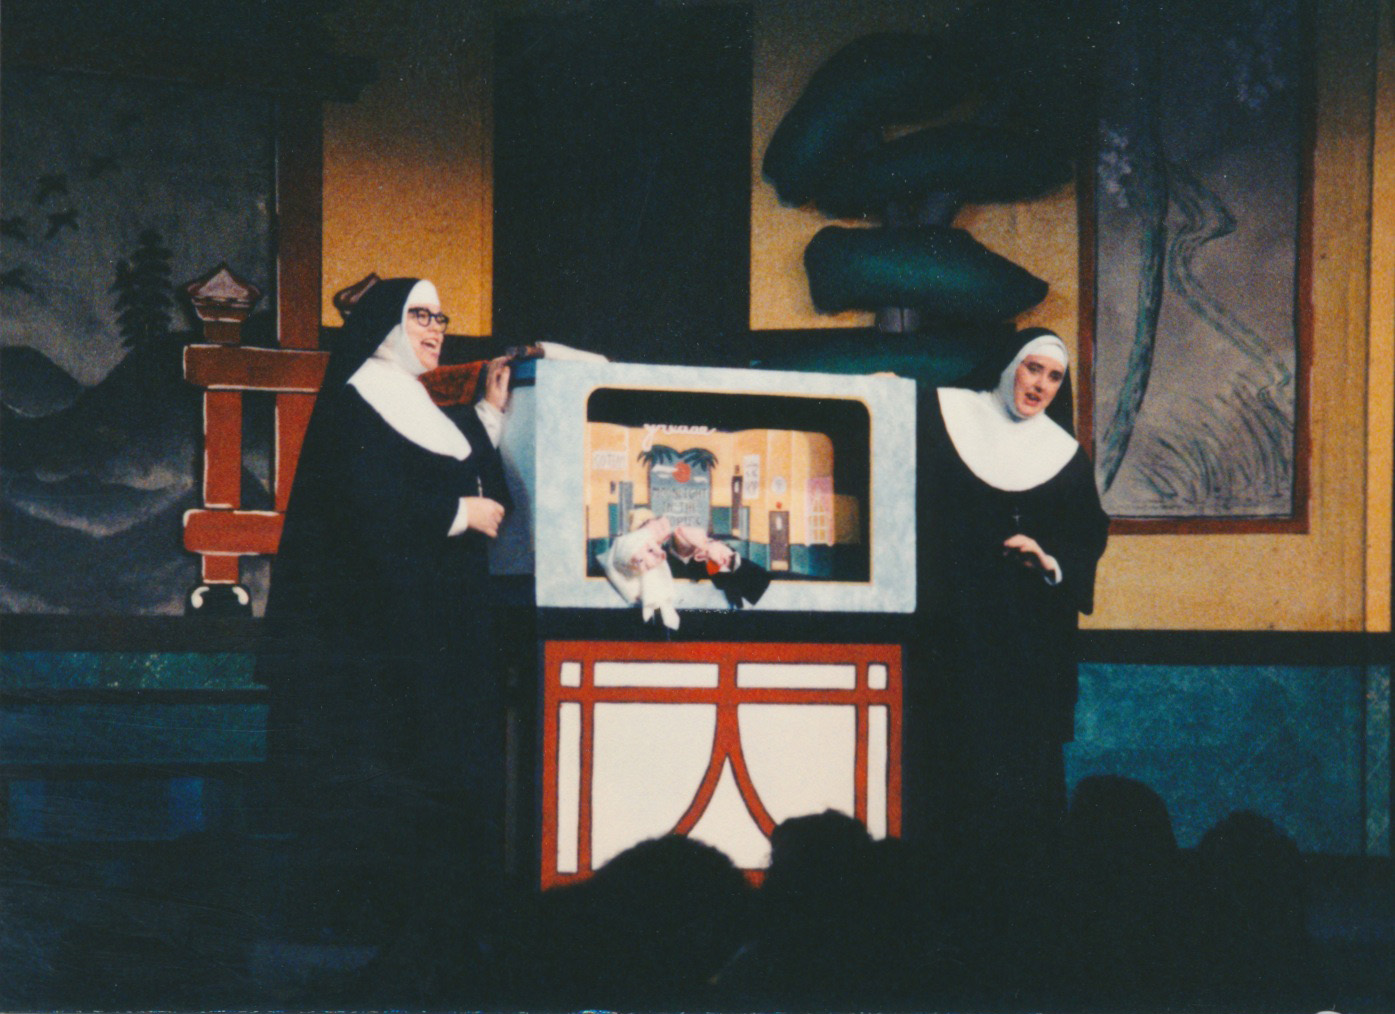 The Cast of The UTEP Dinner Theatre production of Nunsense II